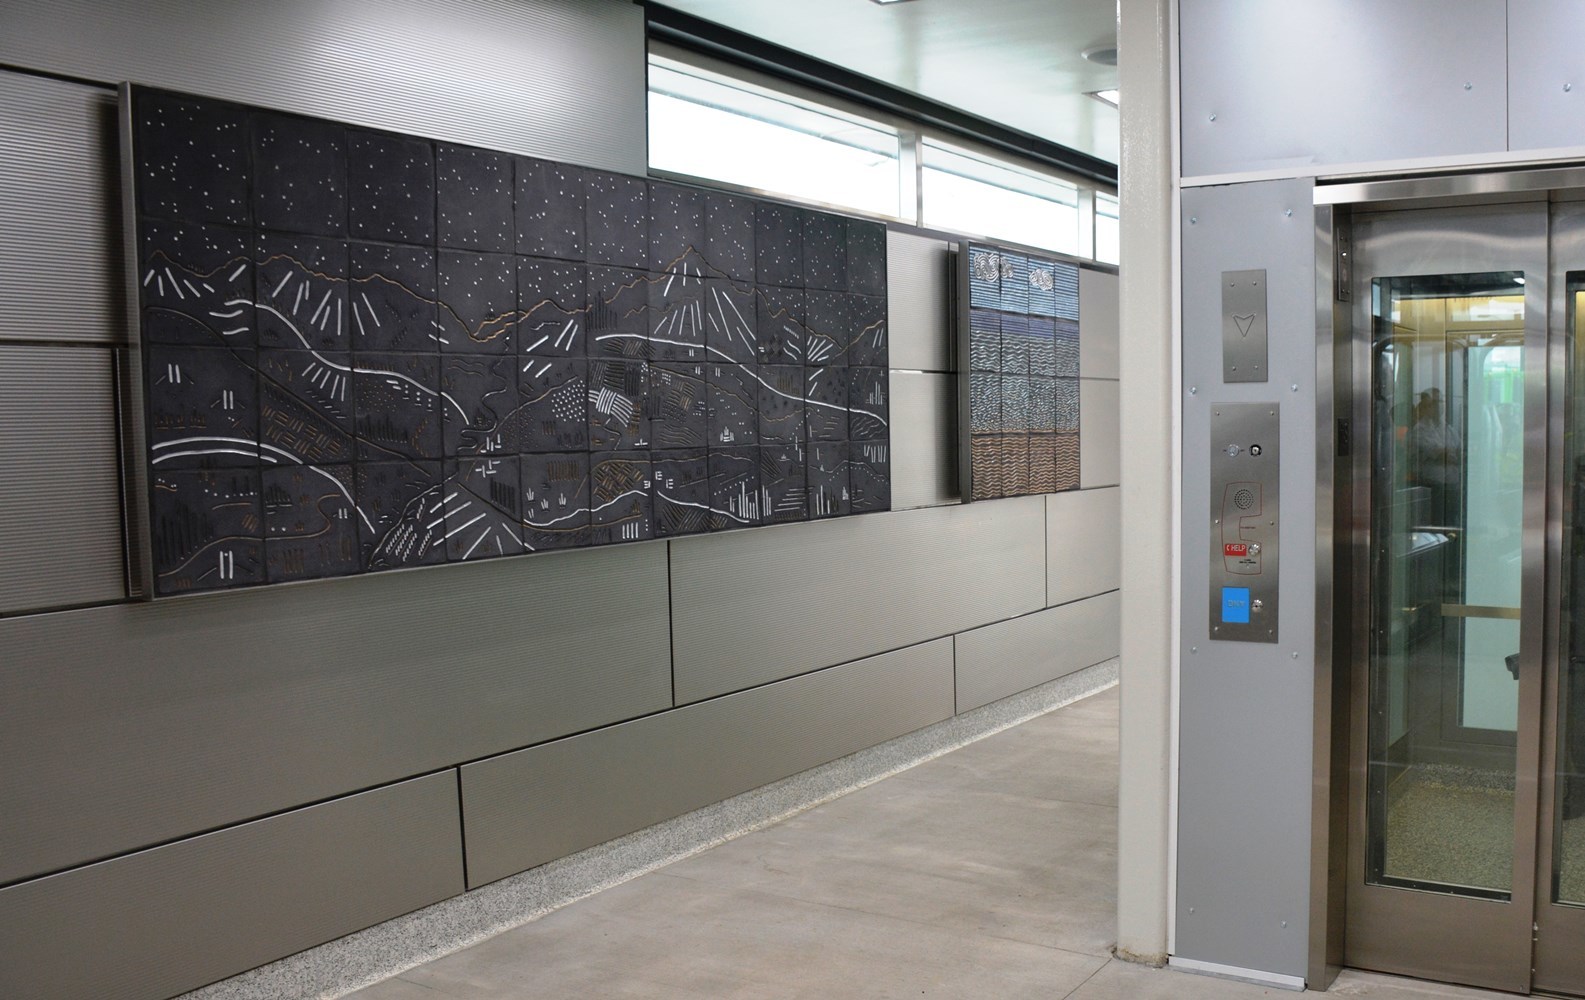 Riders passing through the Ogden entrance of IMD are welcome by two ceramic tile murals known as Vista and Beach, respectively.